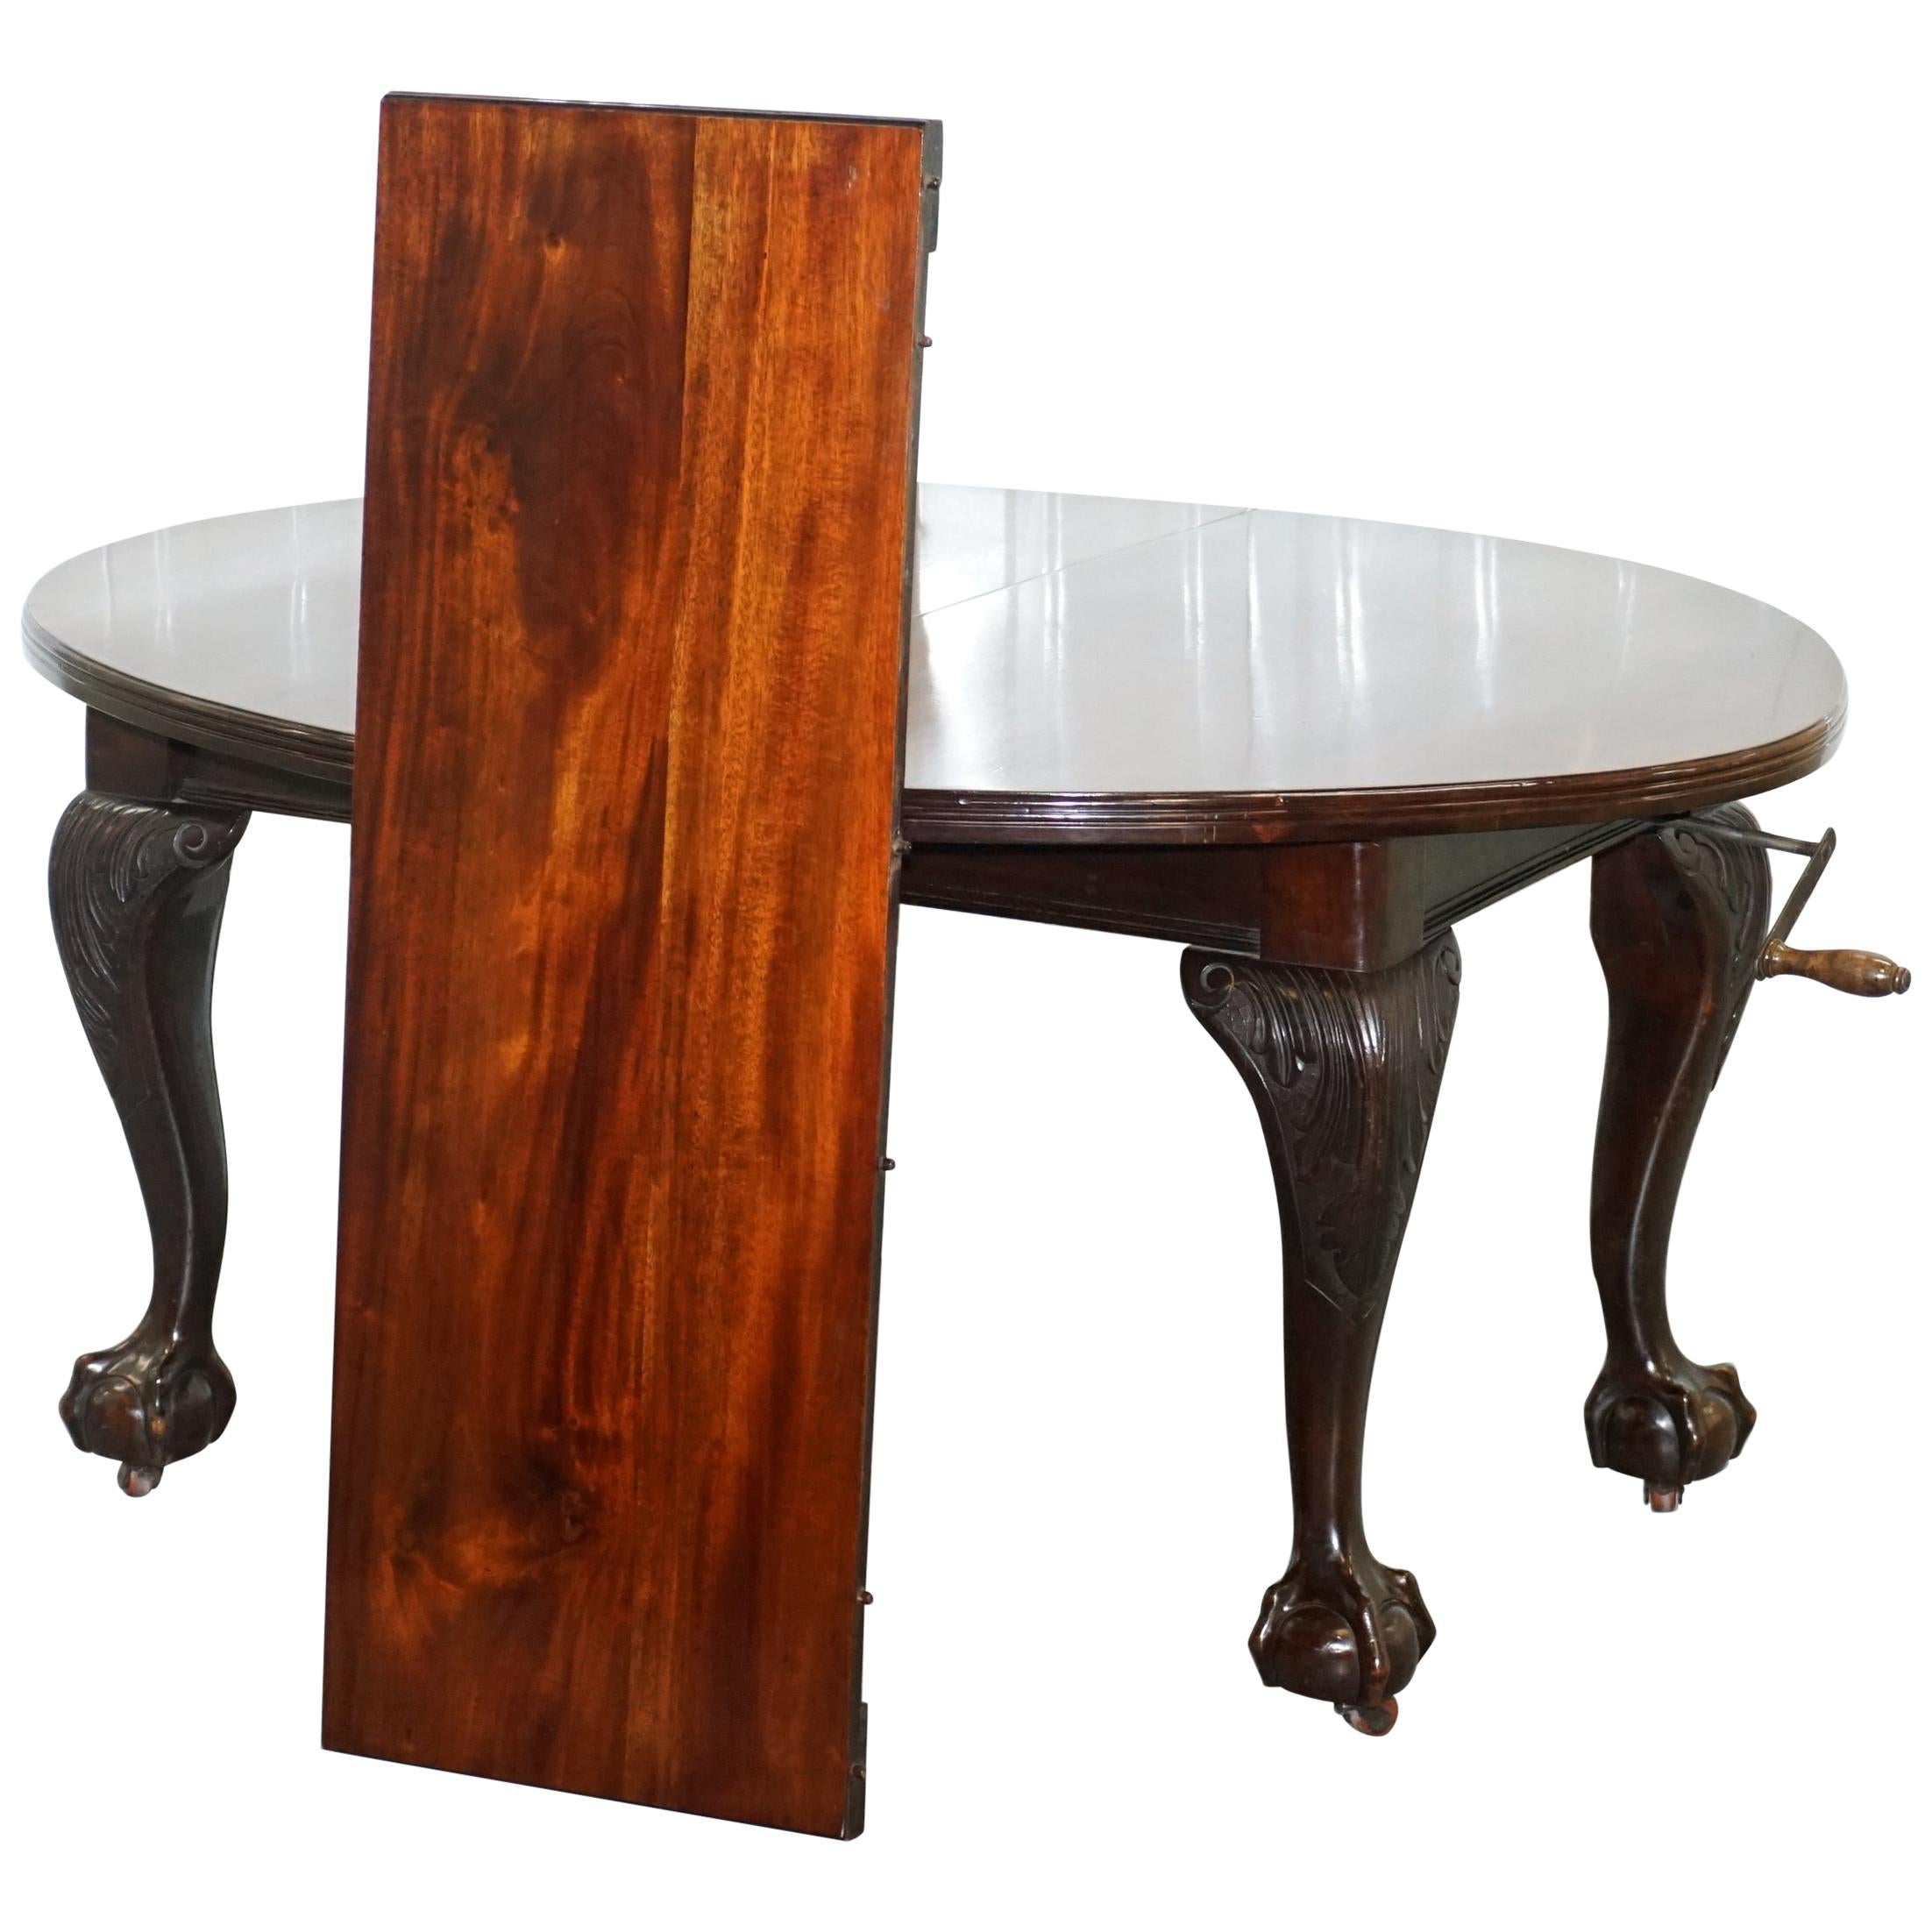 Stunning Victorian James Phillips & Son's Solid Hardwood Extending Dining Table